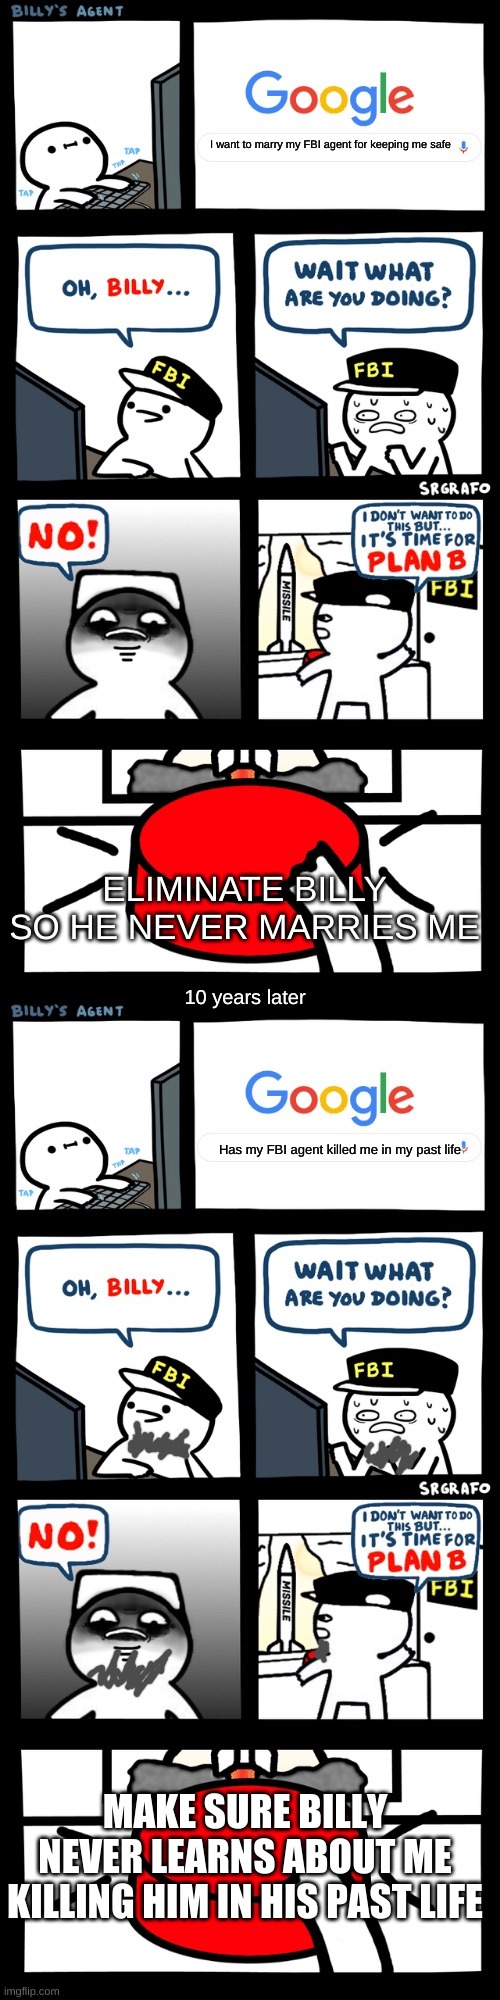 Past life billy | I want to marry my FBI agent for keeping me safe; ELIMINATE BILLY SO HE NEVER MARRIES ME; 10 years later; Has my FBI agent killed me in my past life; MAKE SURE BILLY NEVER LEARNS ABOUT ME KILLING HIM IN HIS PAST LIFE | image tagged in billy s fbi agent plan b | made w/ Imgflip meme maker